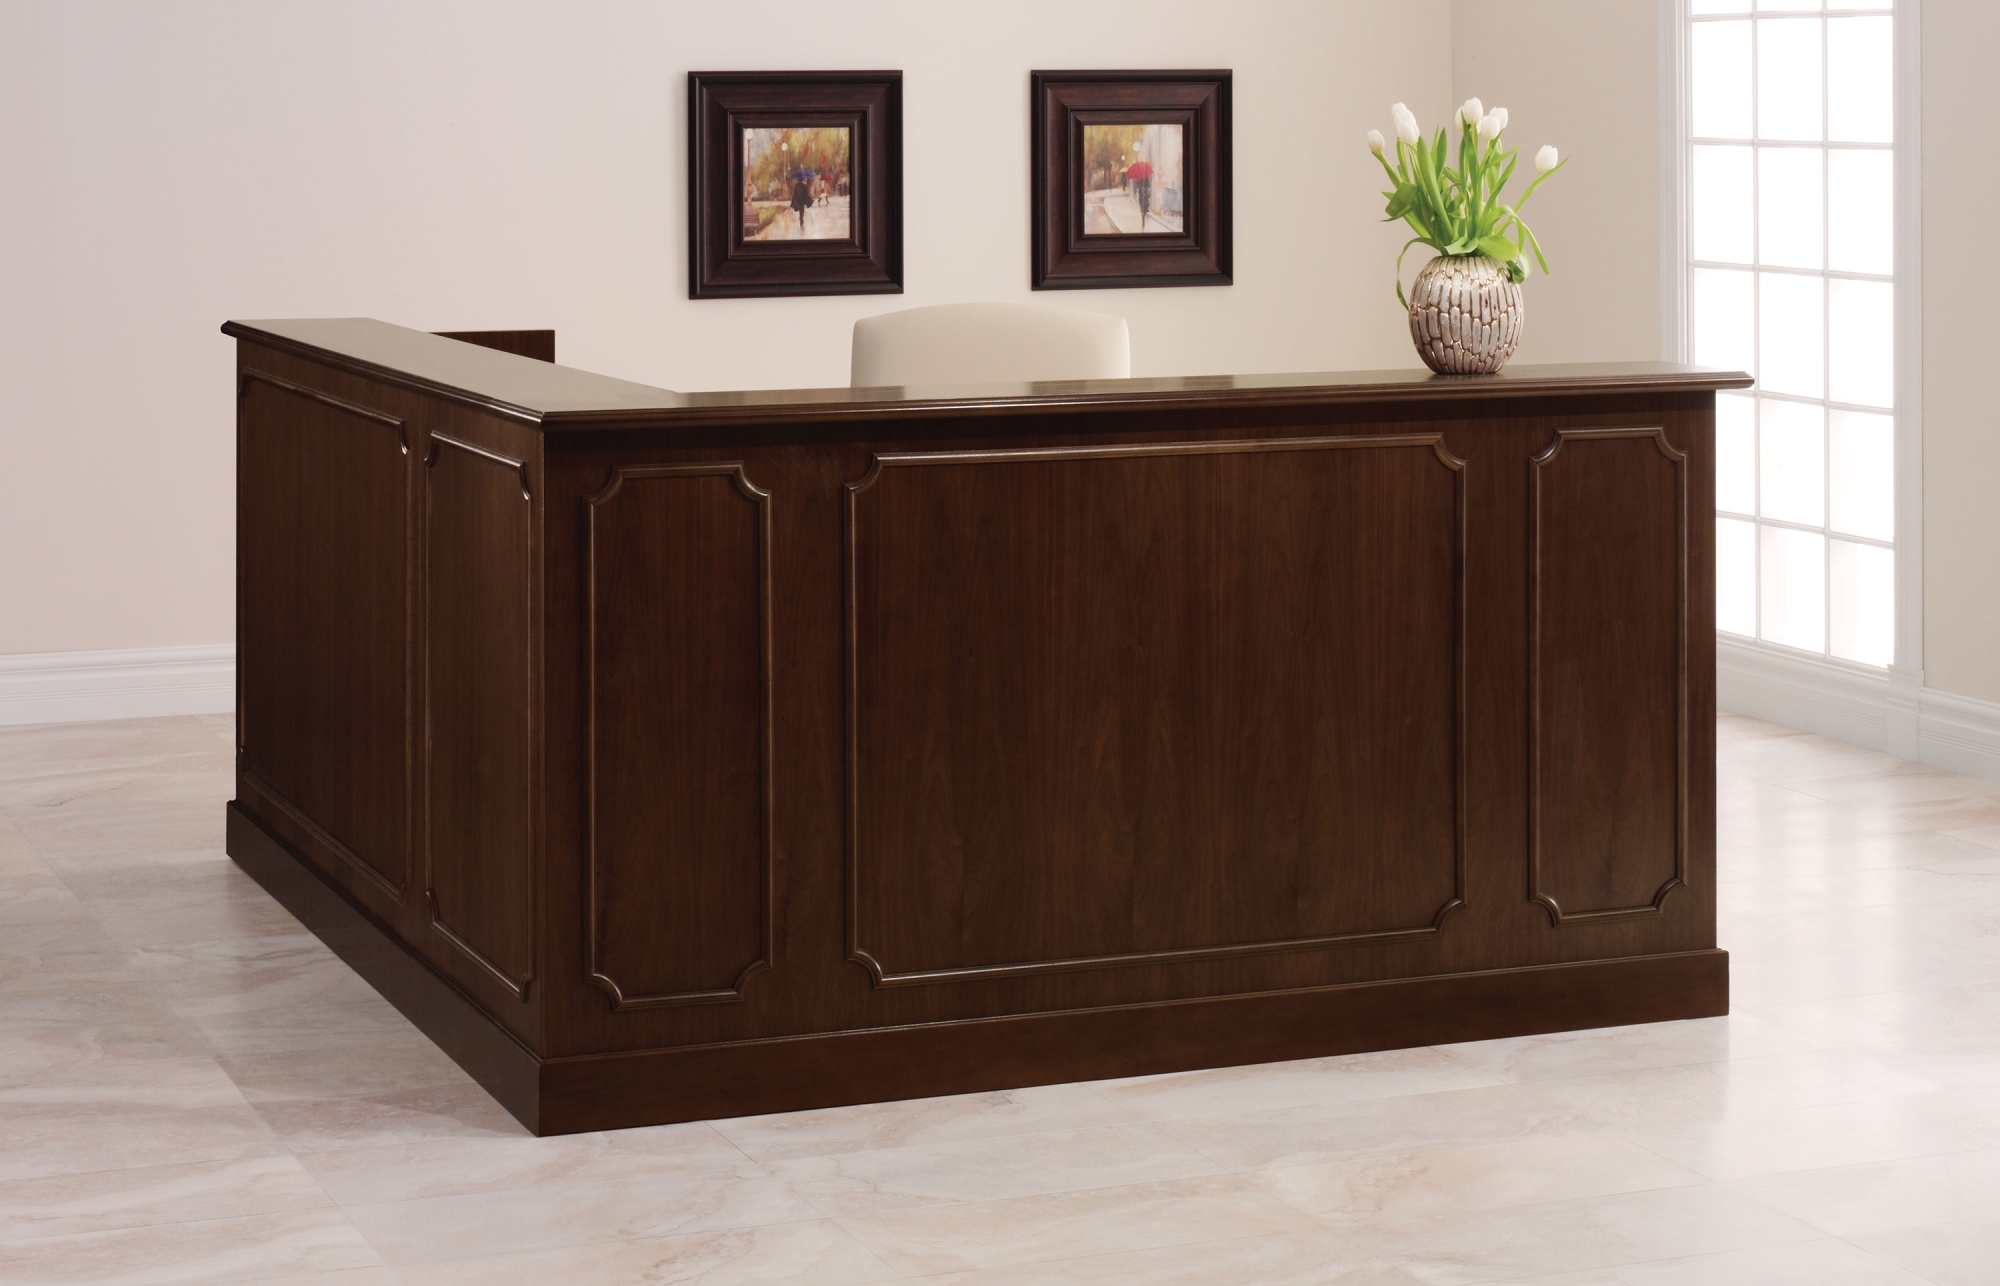 Indiana Furniture, Cameo Reception echoes history and creates a timeless foundation for today’s sophisticated work place.